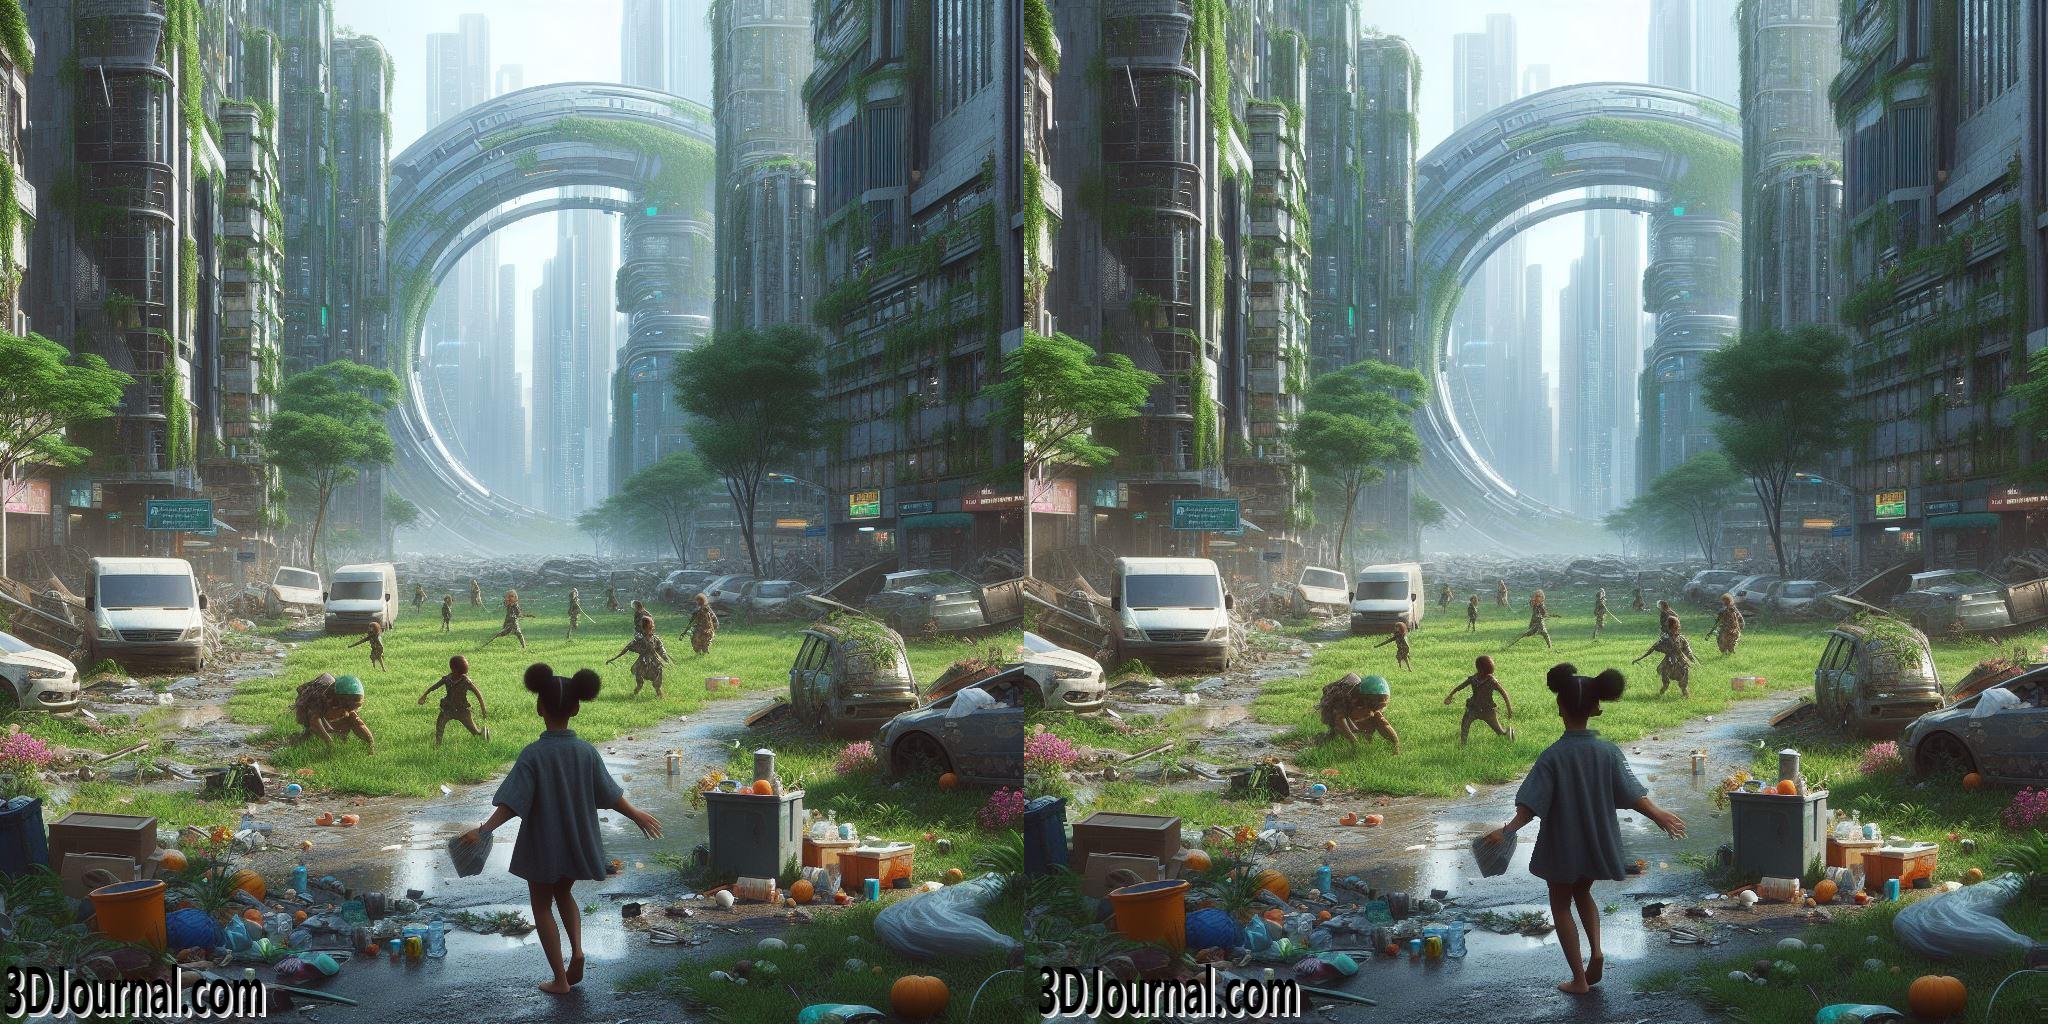 Children in the city of the future